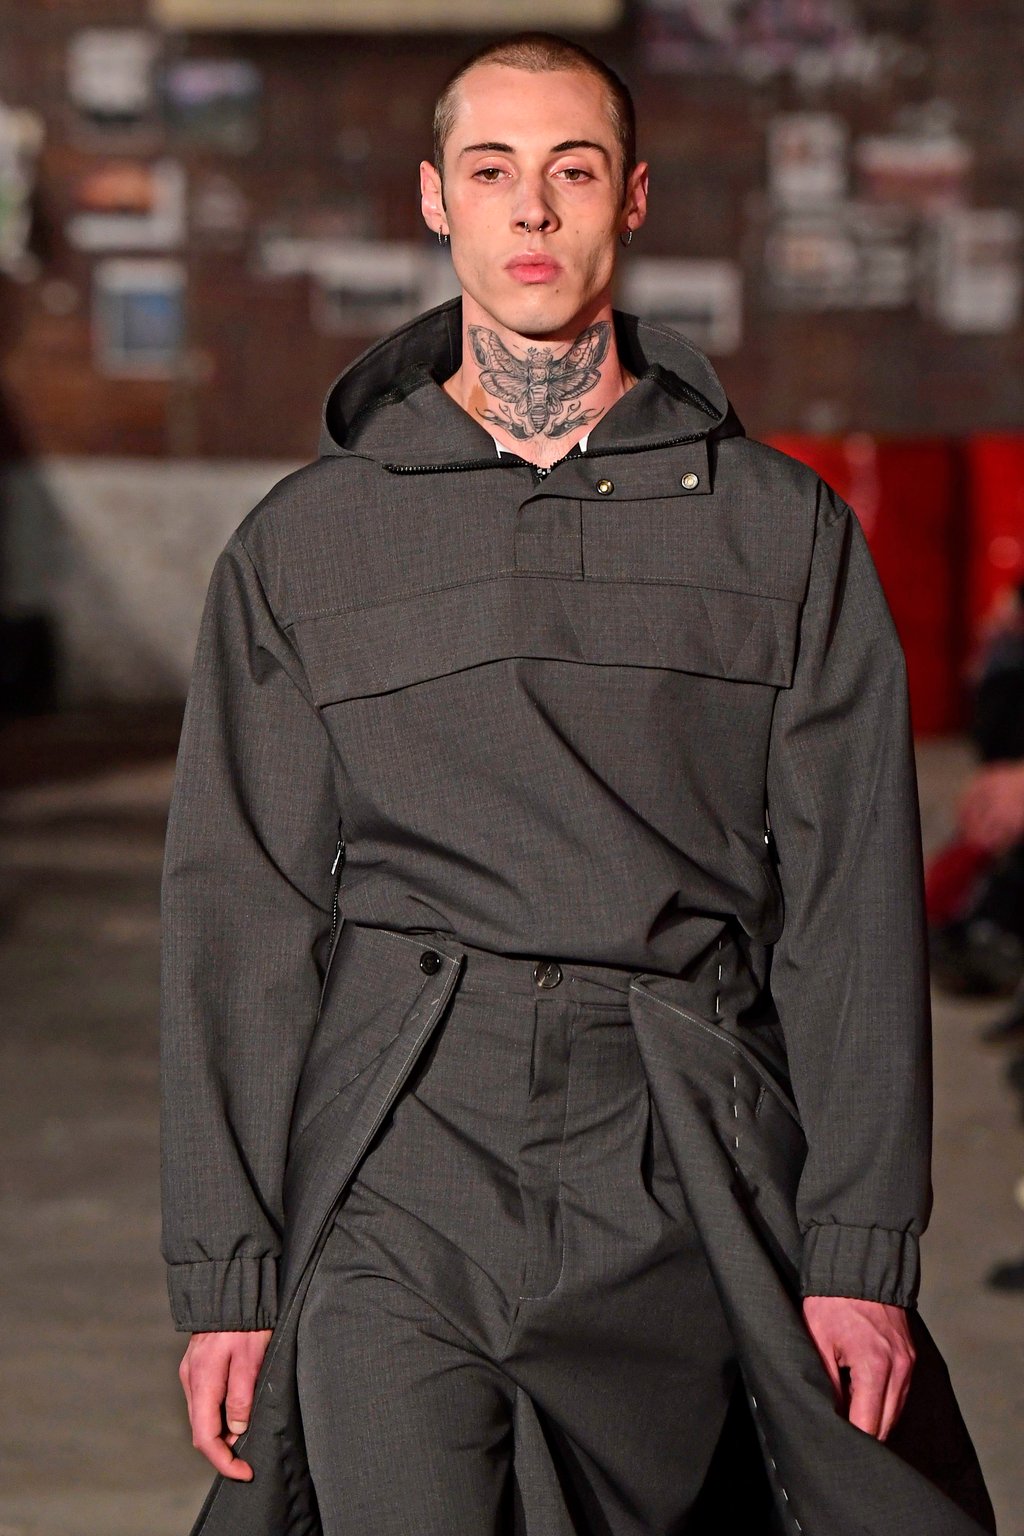 SSAW19 Archive Parka collectif GAMUT